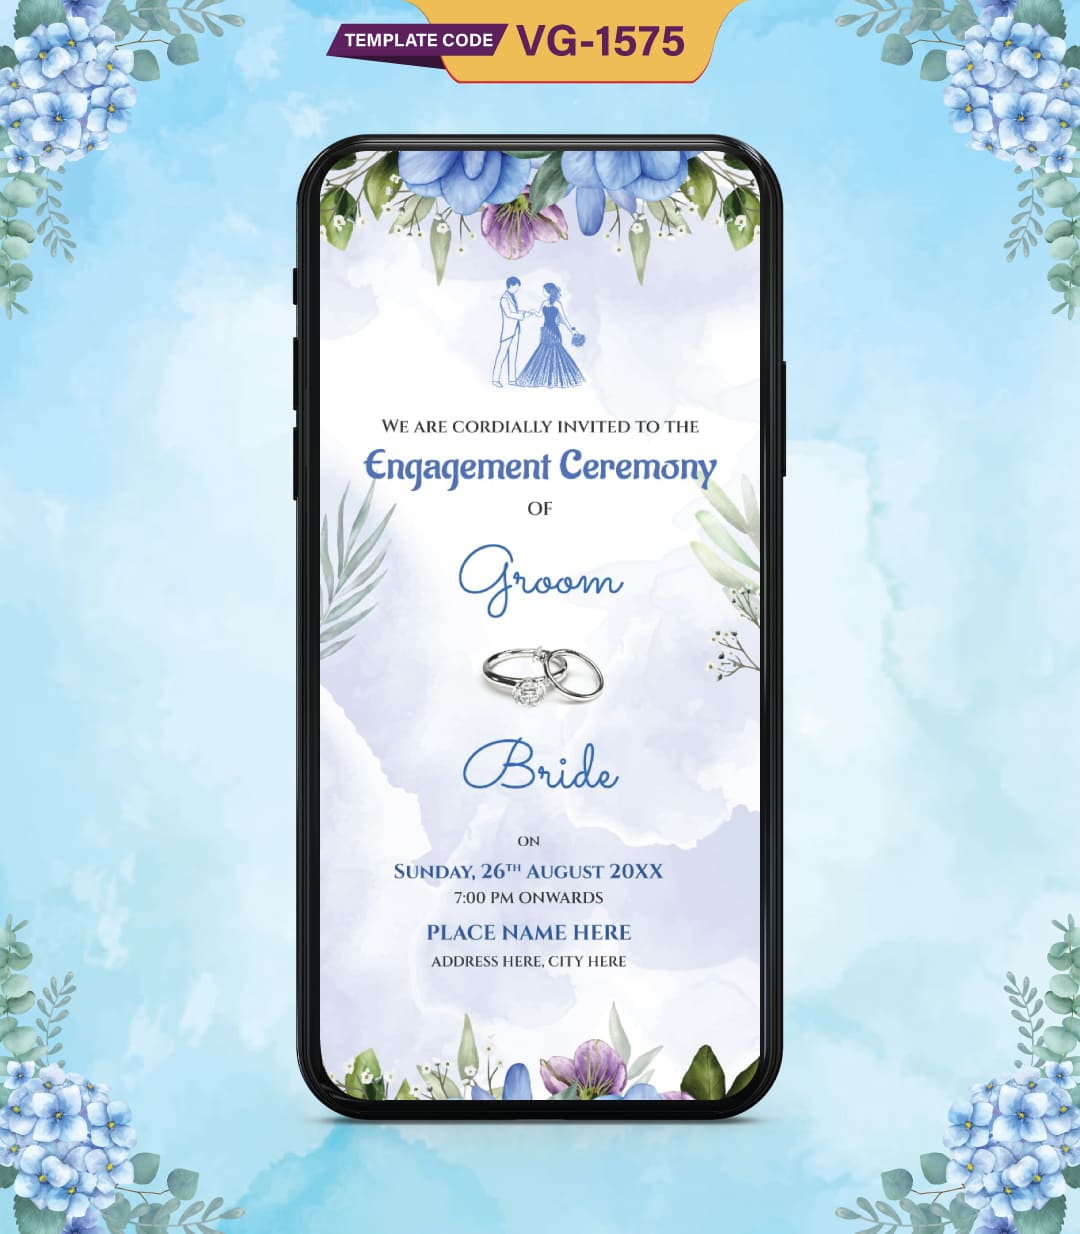 Engagement Ceremony Party Templates